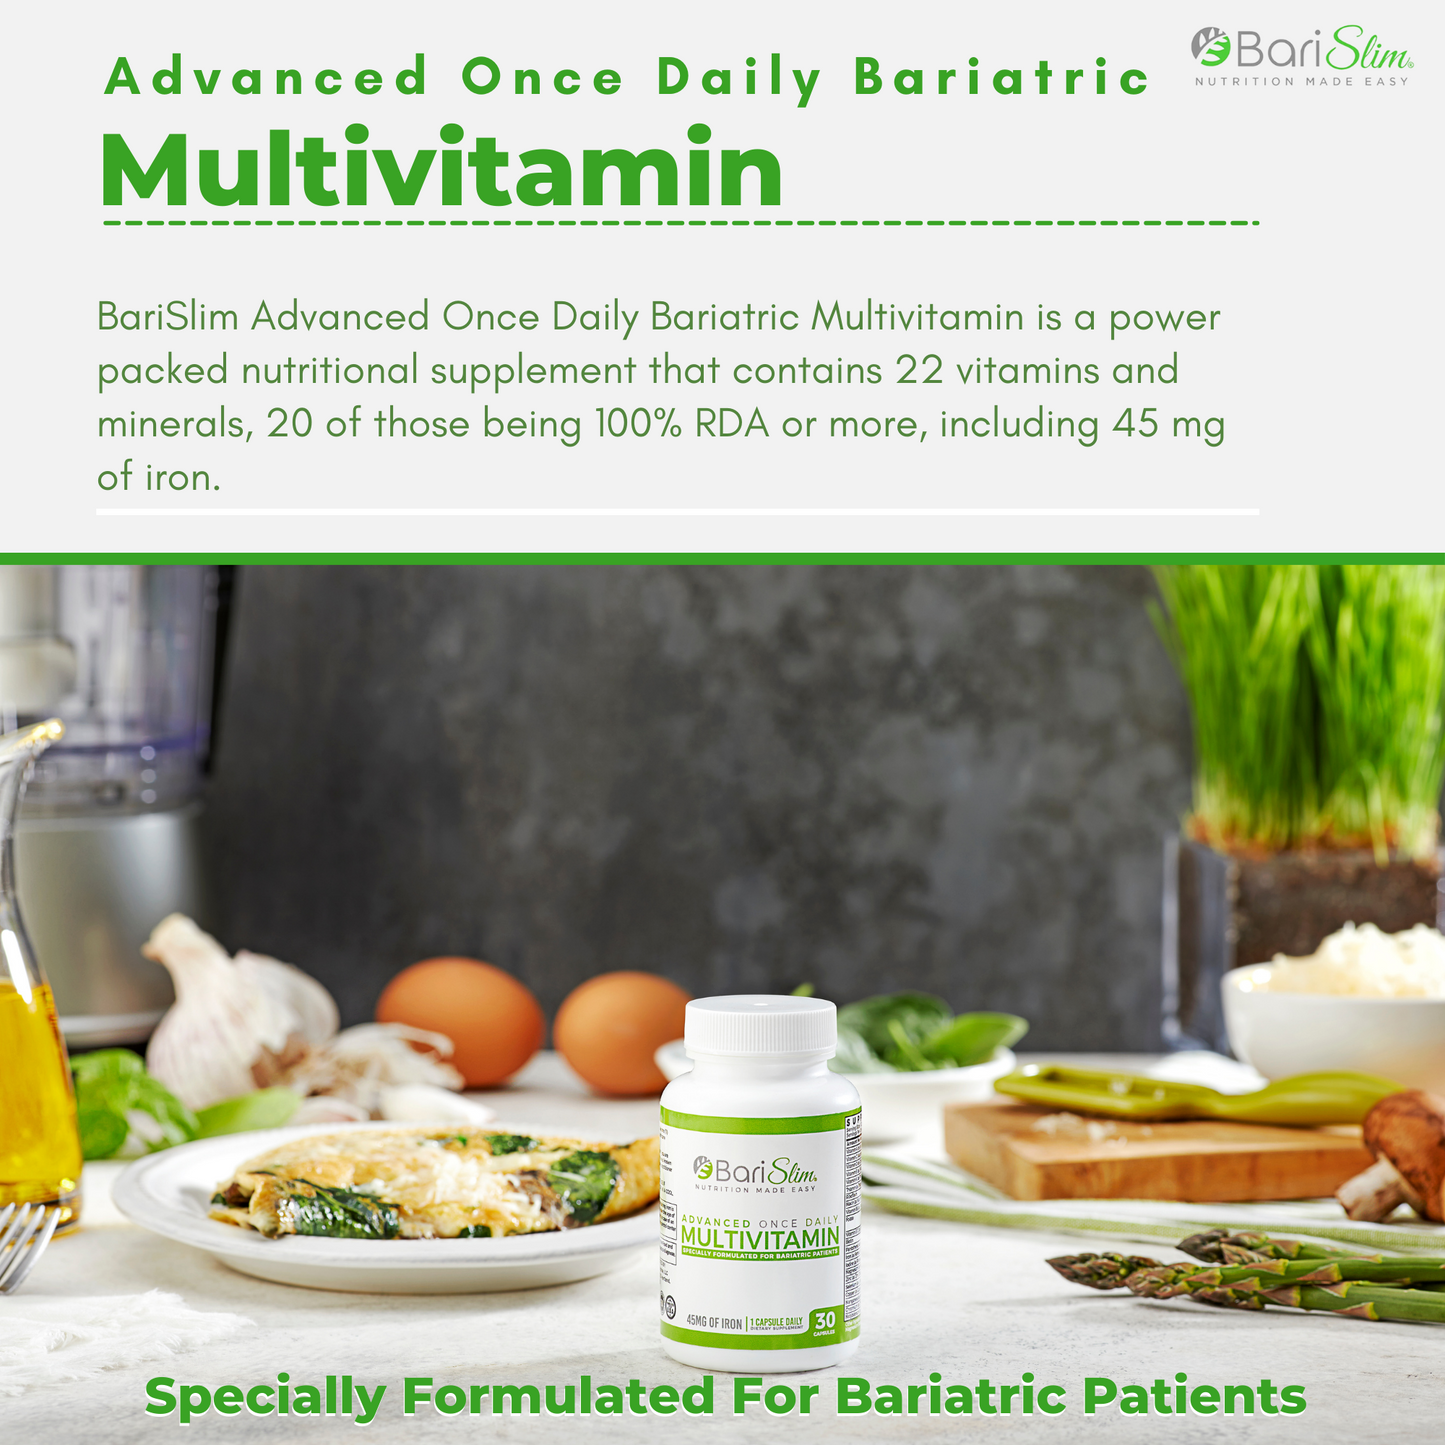 Advanced Once Daily Bariatric multivitamin tablet with 45mg of iron